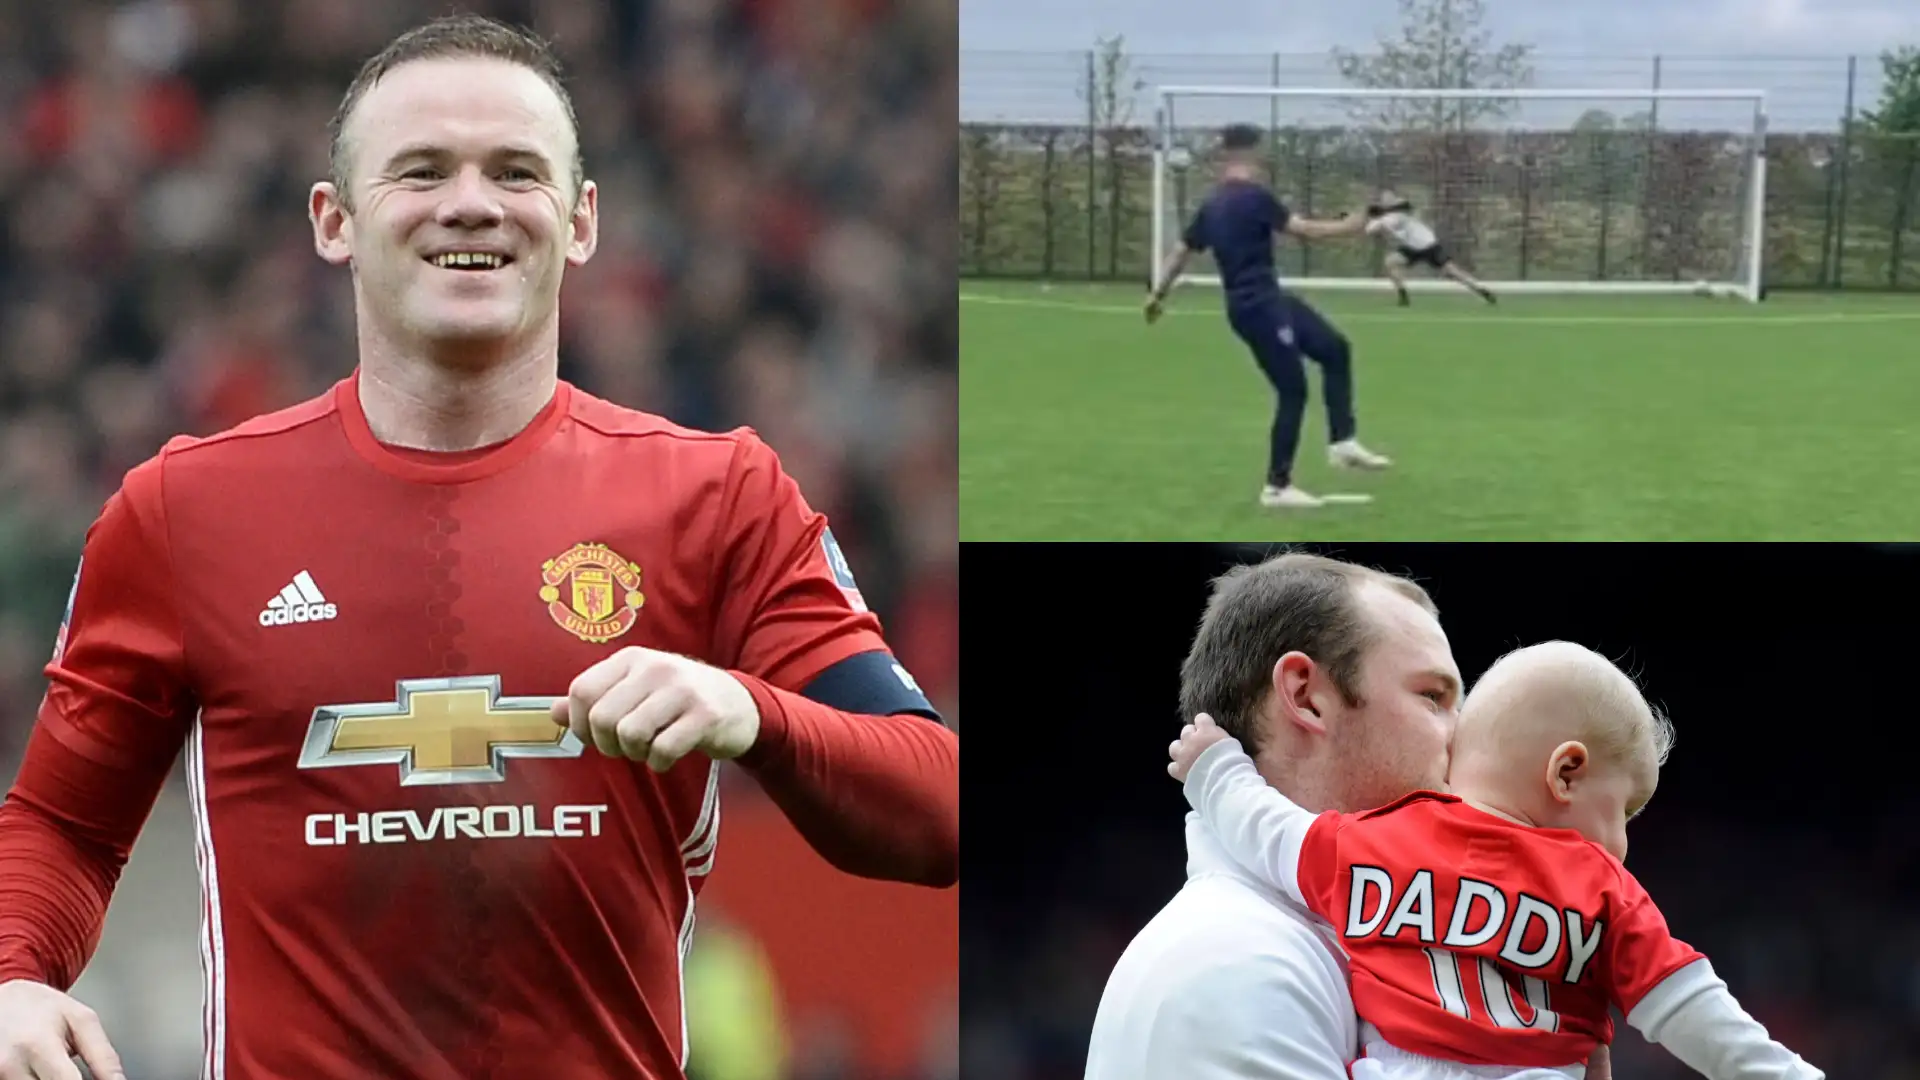 VIDEO: Rooneys know how to finish! Kai showcases goalscoring skills to rival dad Wayne – with Man Utd academy star hitting the net with both feet